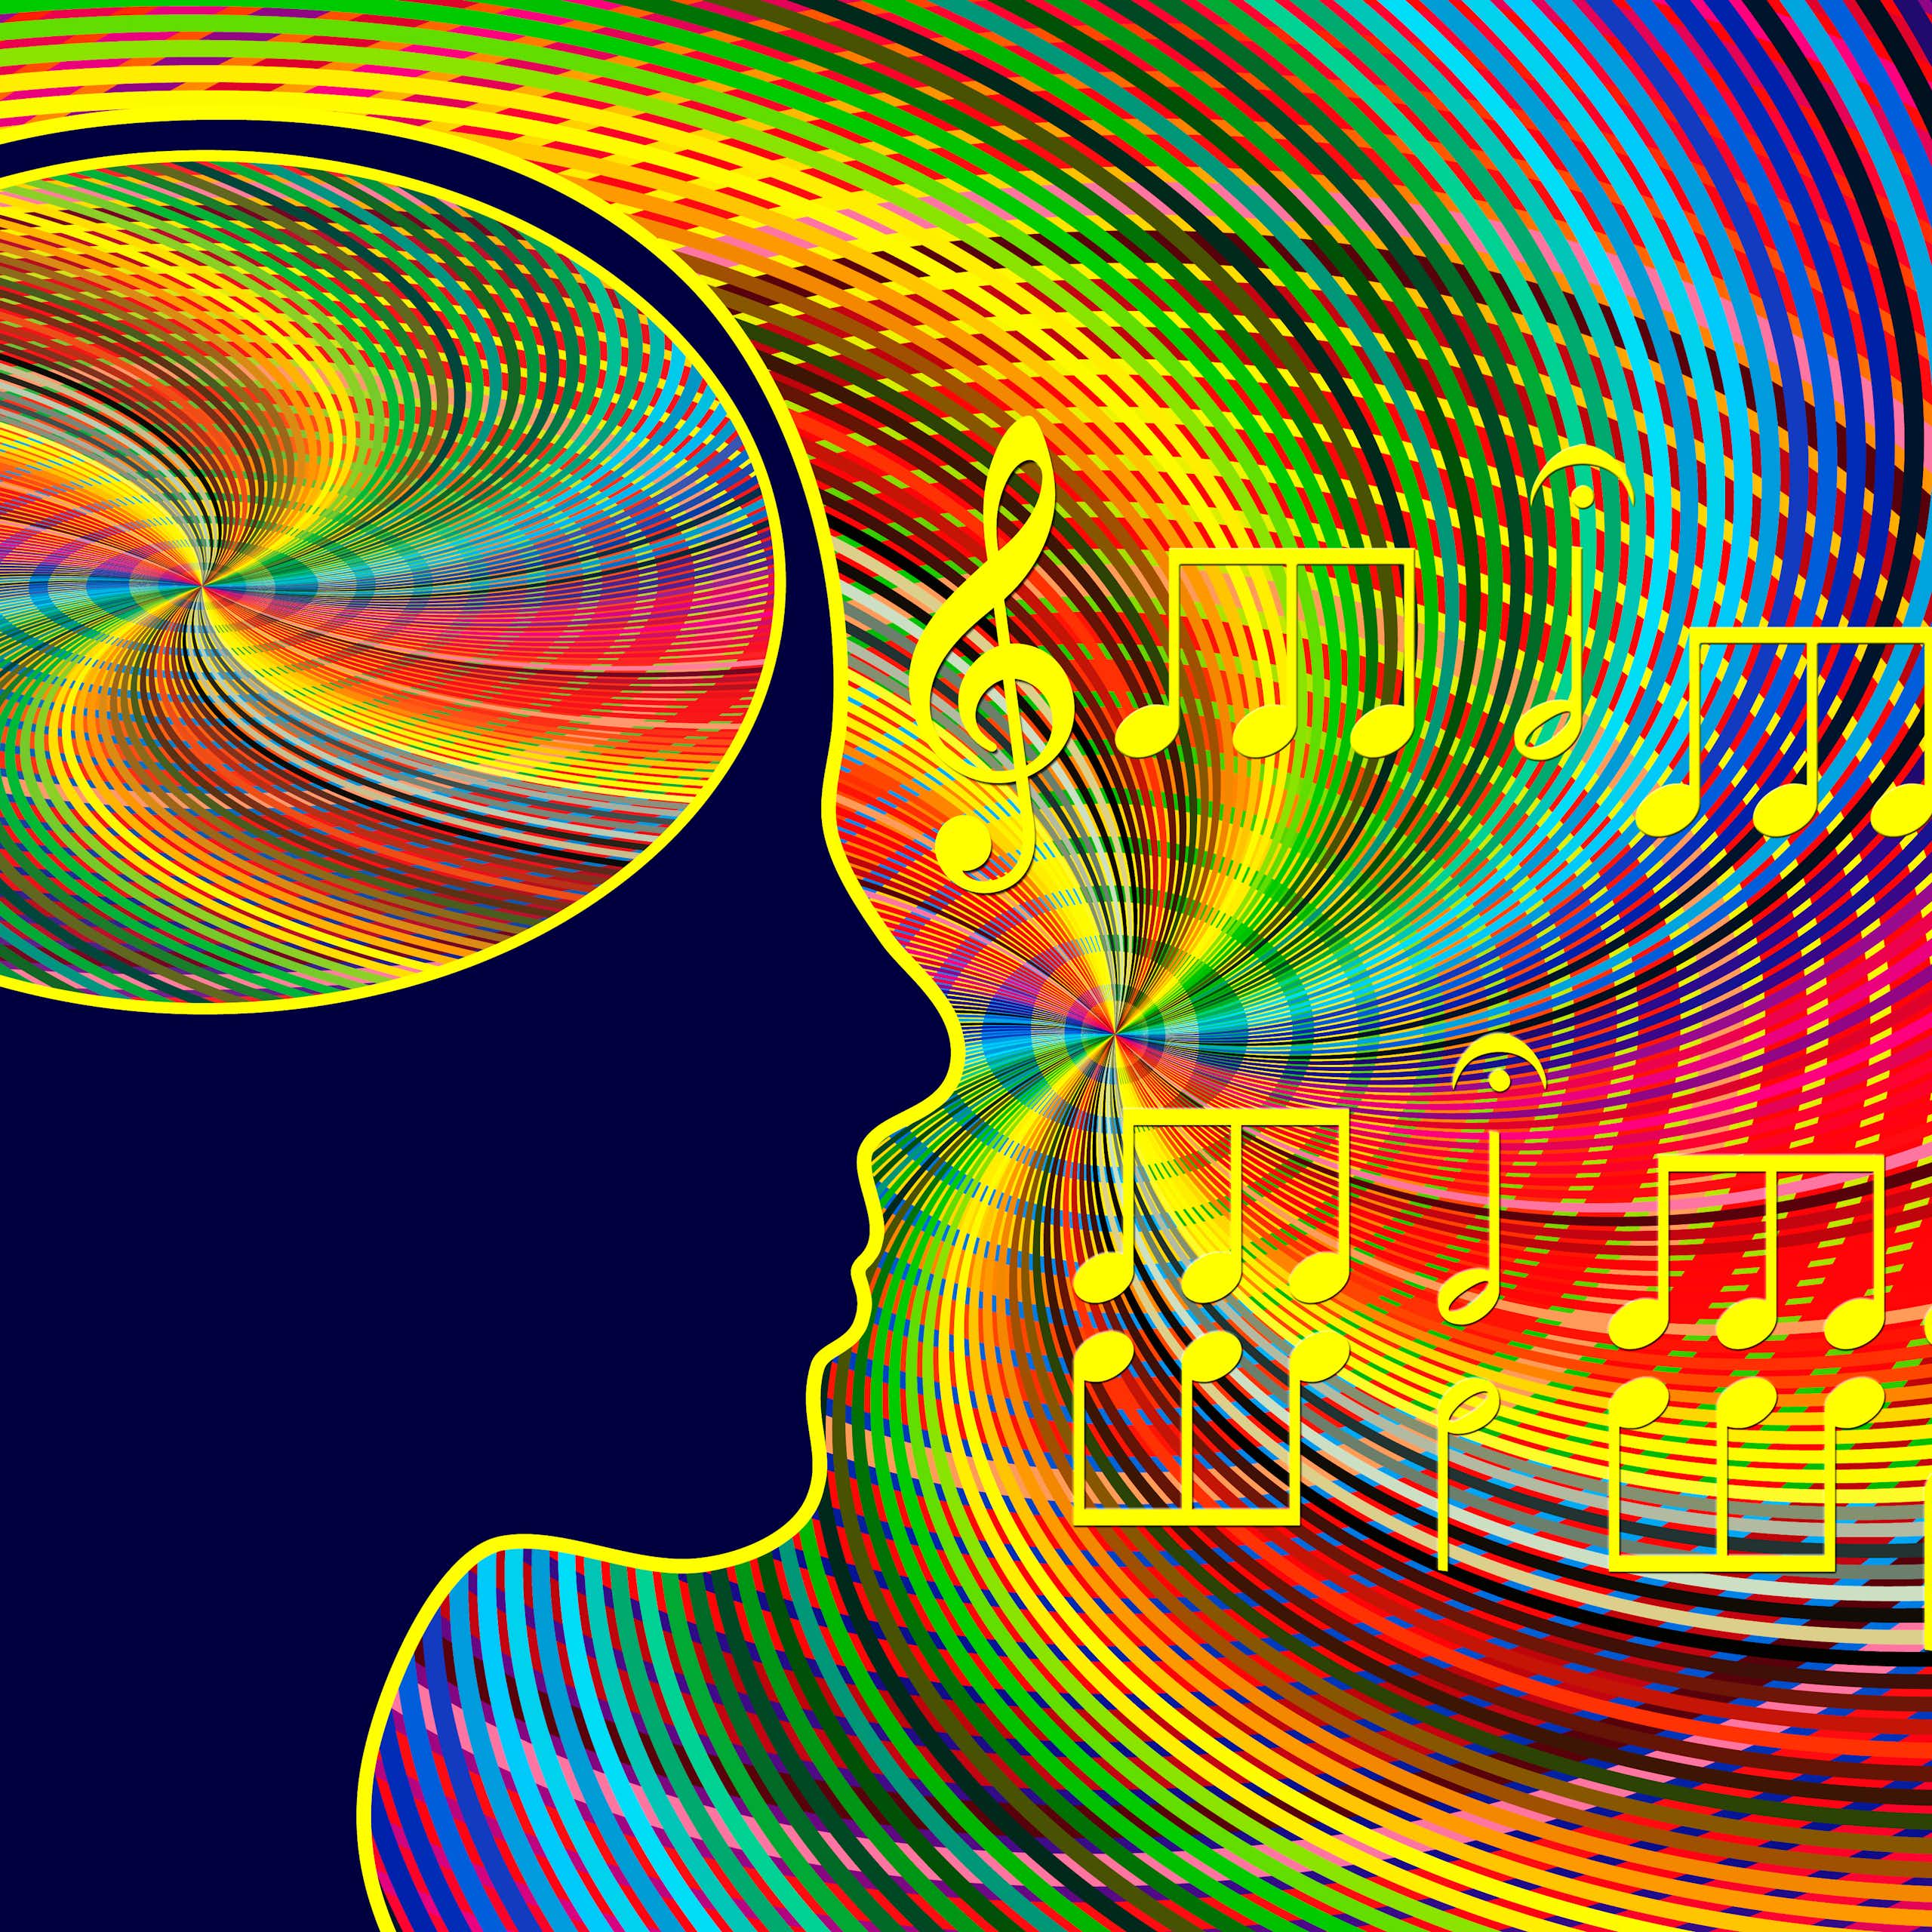 Illustration of a person's brain when listening to musical notes.